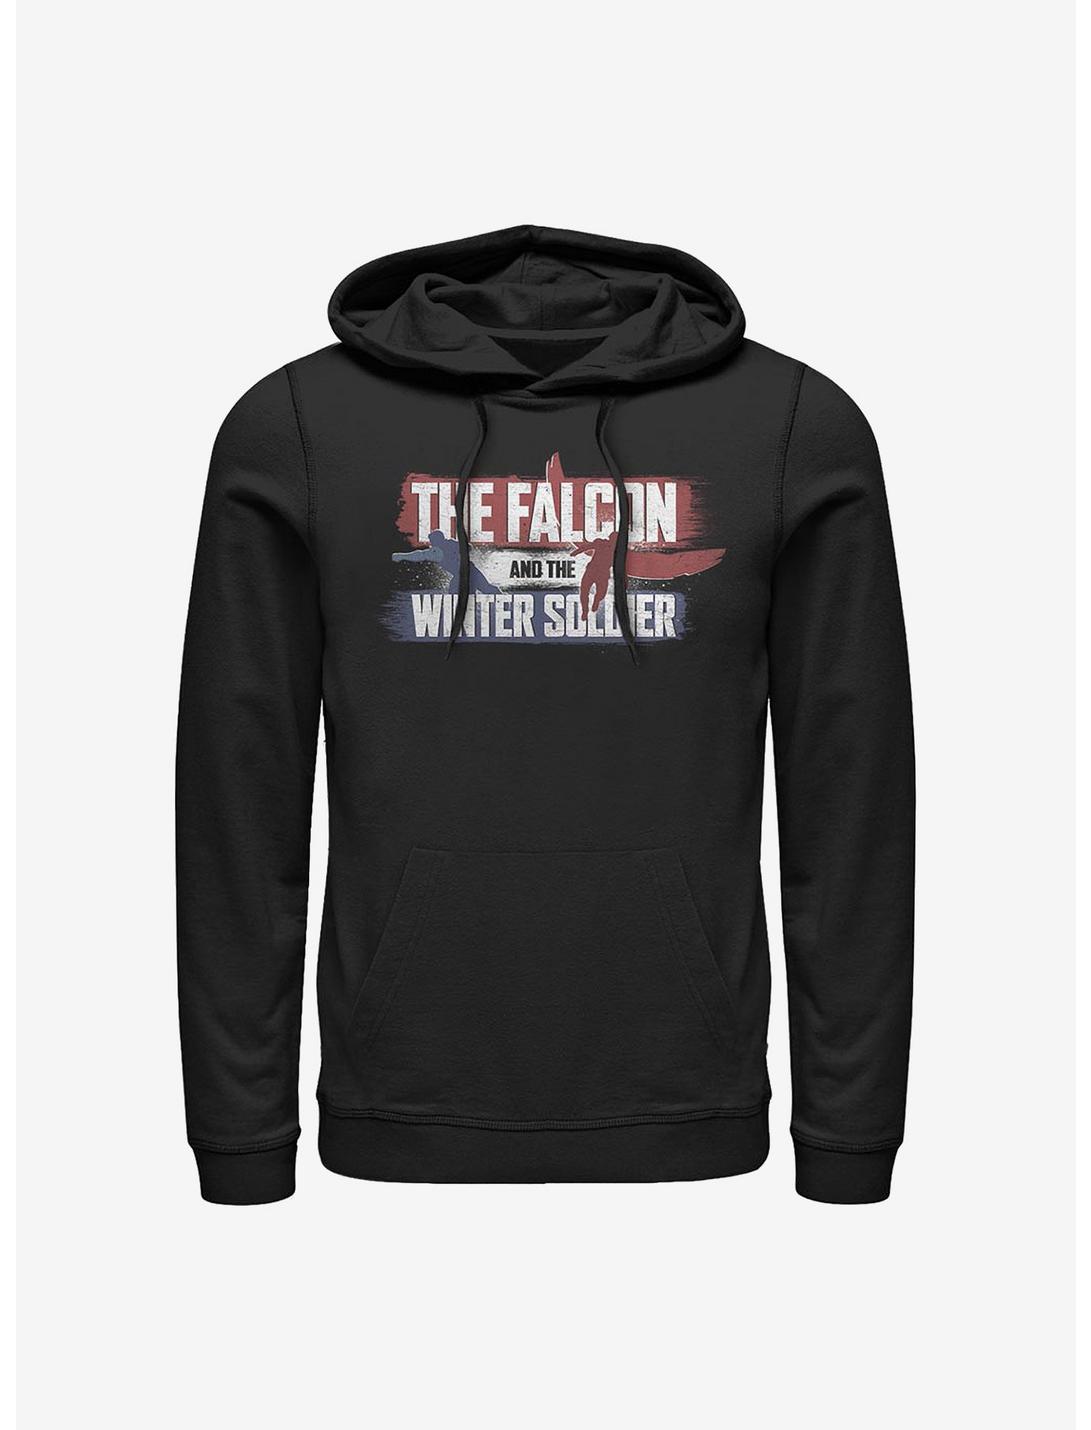 Marvel The Falcon And The Winter Soldier Spray Paint Logo Hoodie, BLACK, hi-res